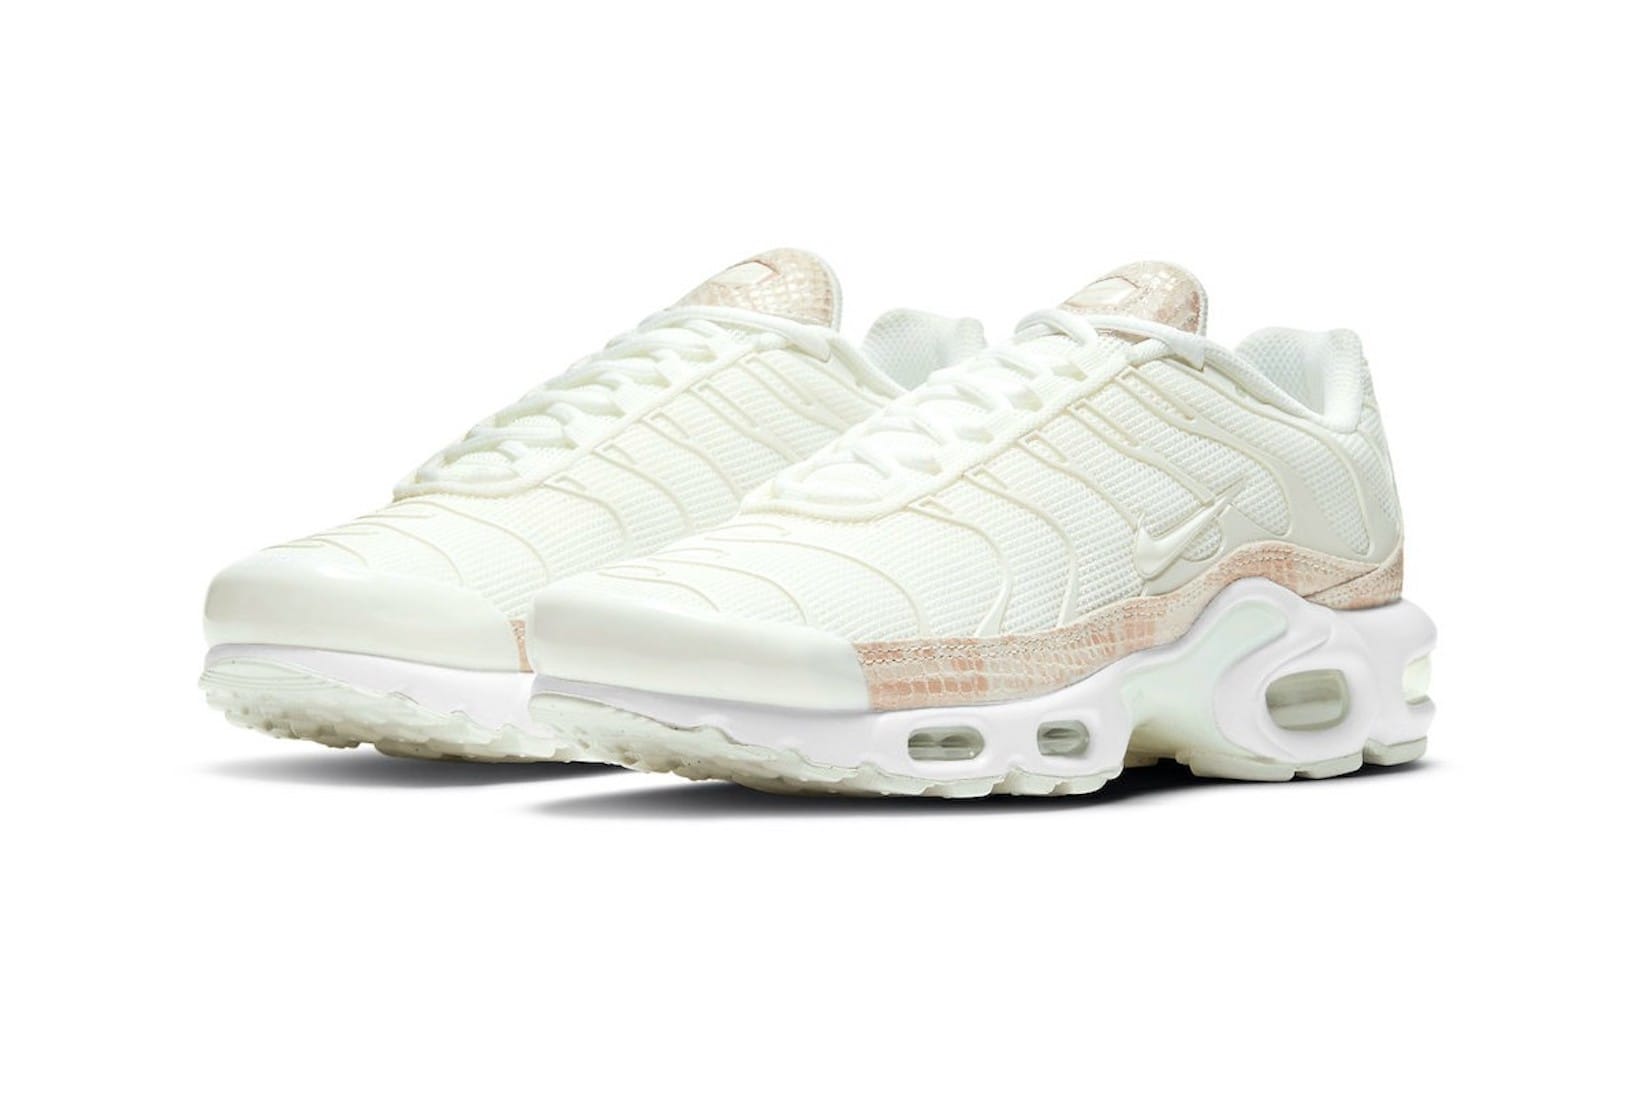 white and pink air max plus